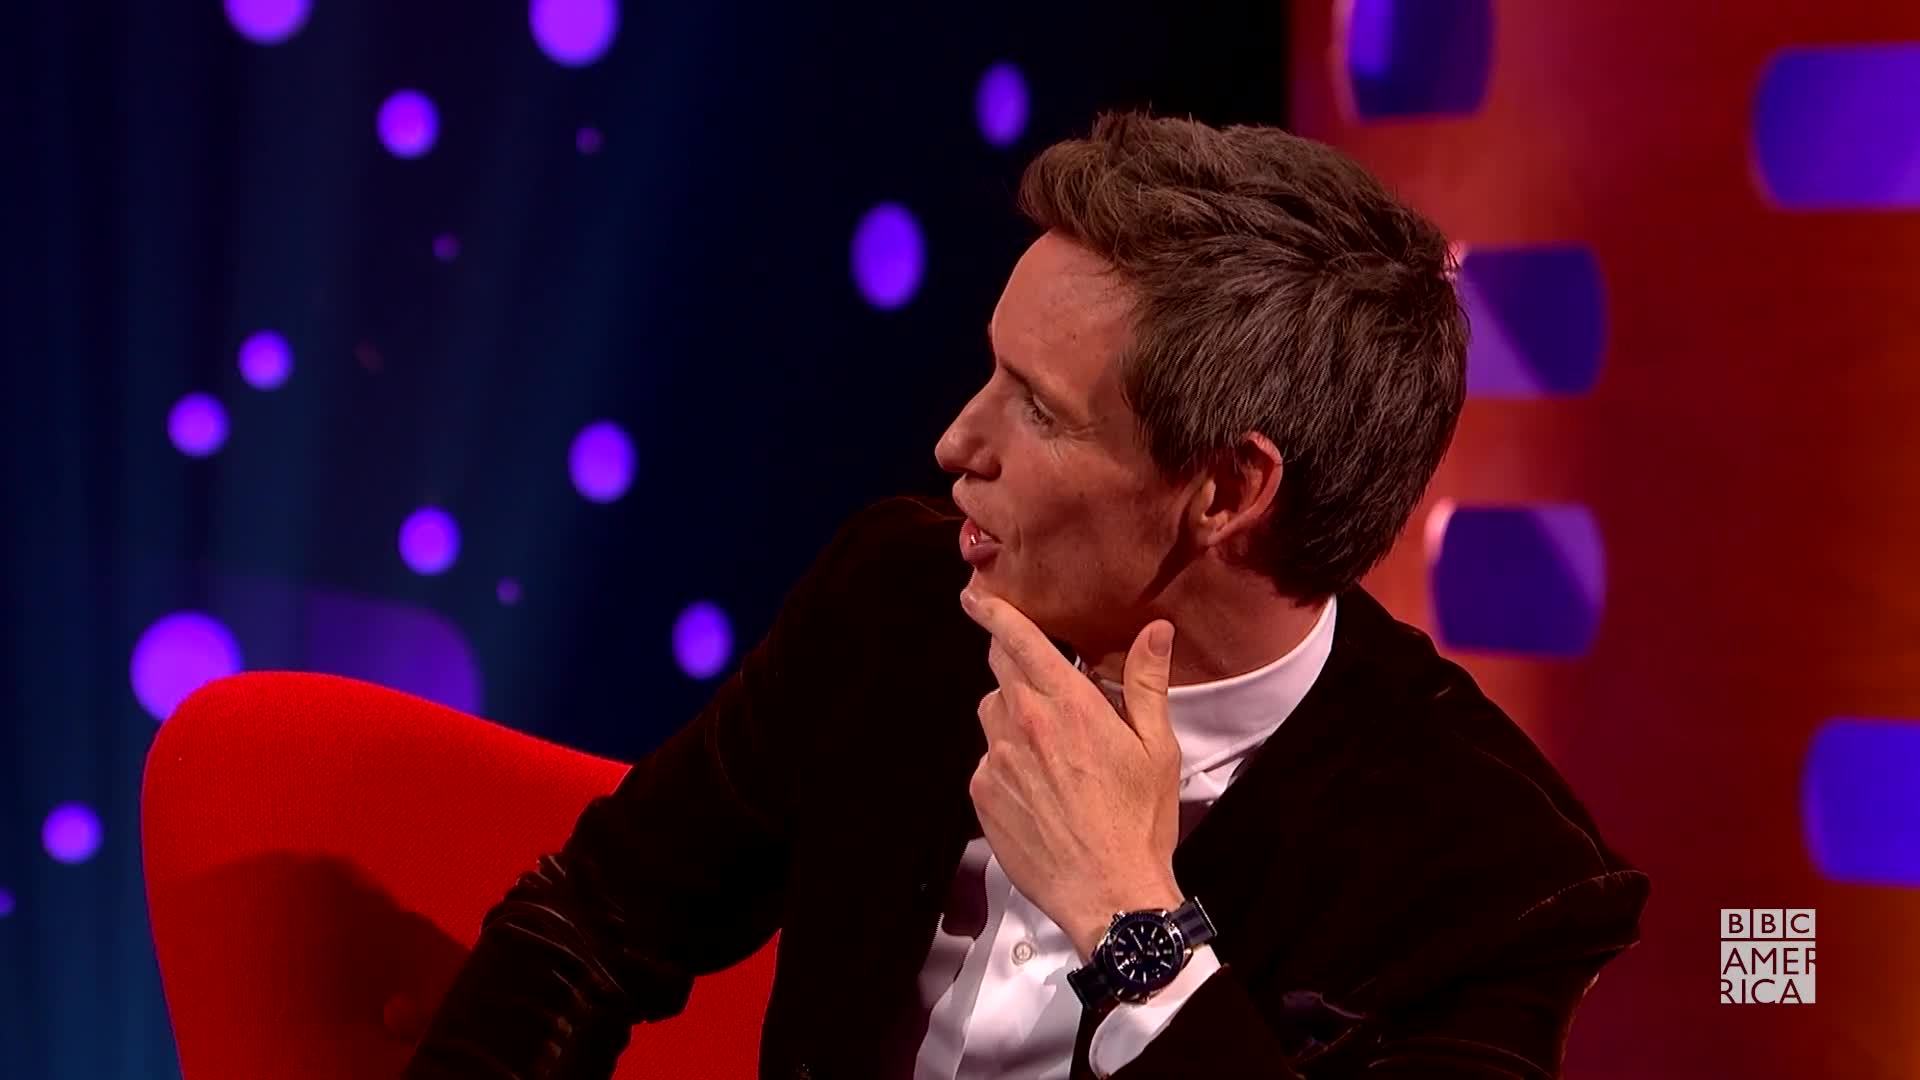 Watch Eddie Redmayne’s Adorable Gift to His Grandmother | The Graham Norton Show Video Extras